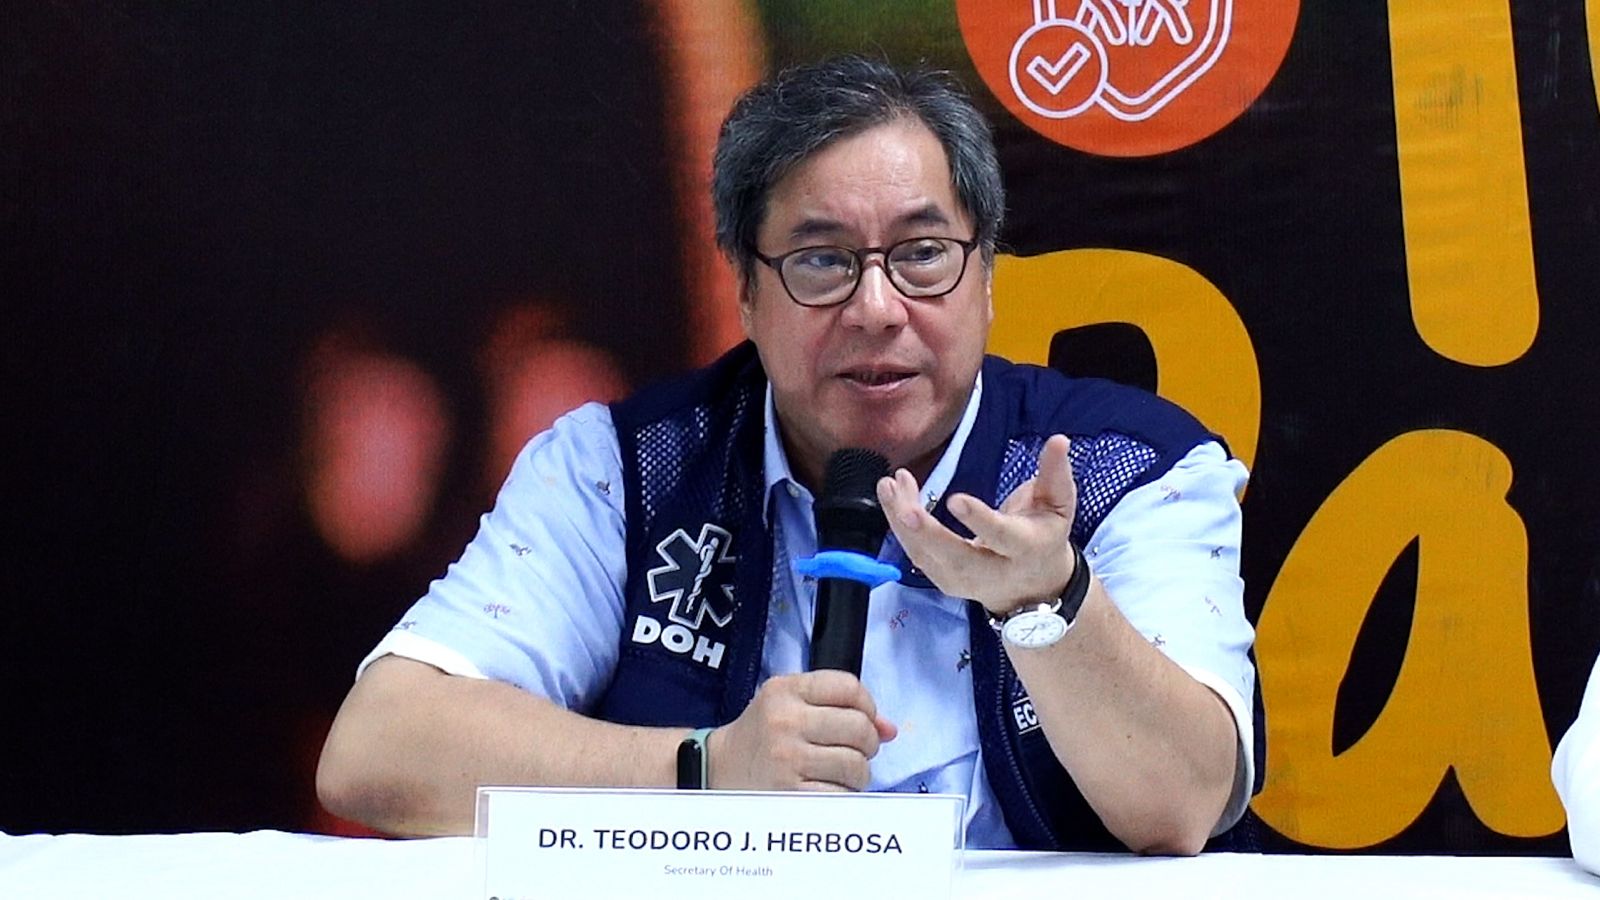 Health Secretary Teodoro Herbosa on Monday pushed for the establishment of designated community fireworks display areas during New Year's eve celebrations, citing health and environmental hazards associated with the individual use of fireworks. vaccines measles pertussis